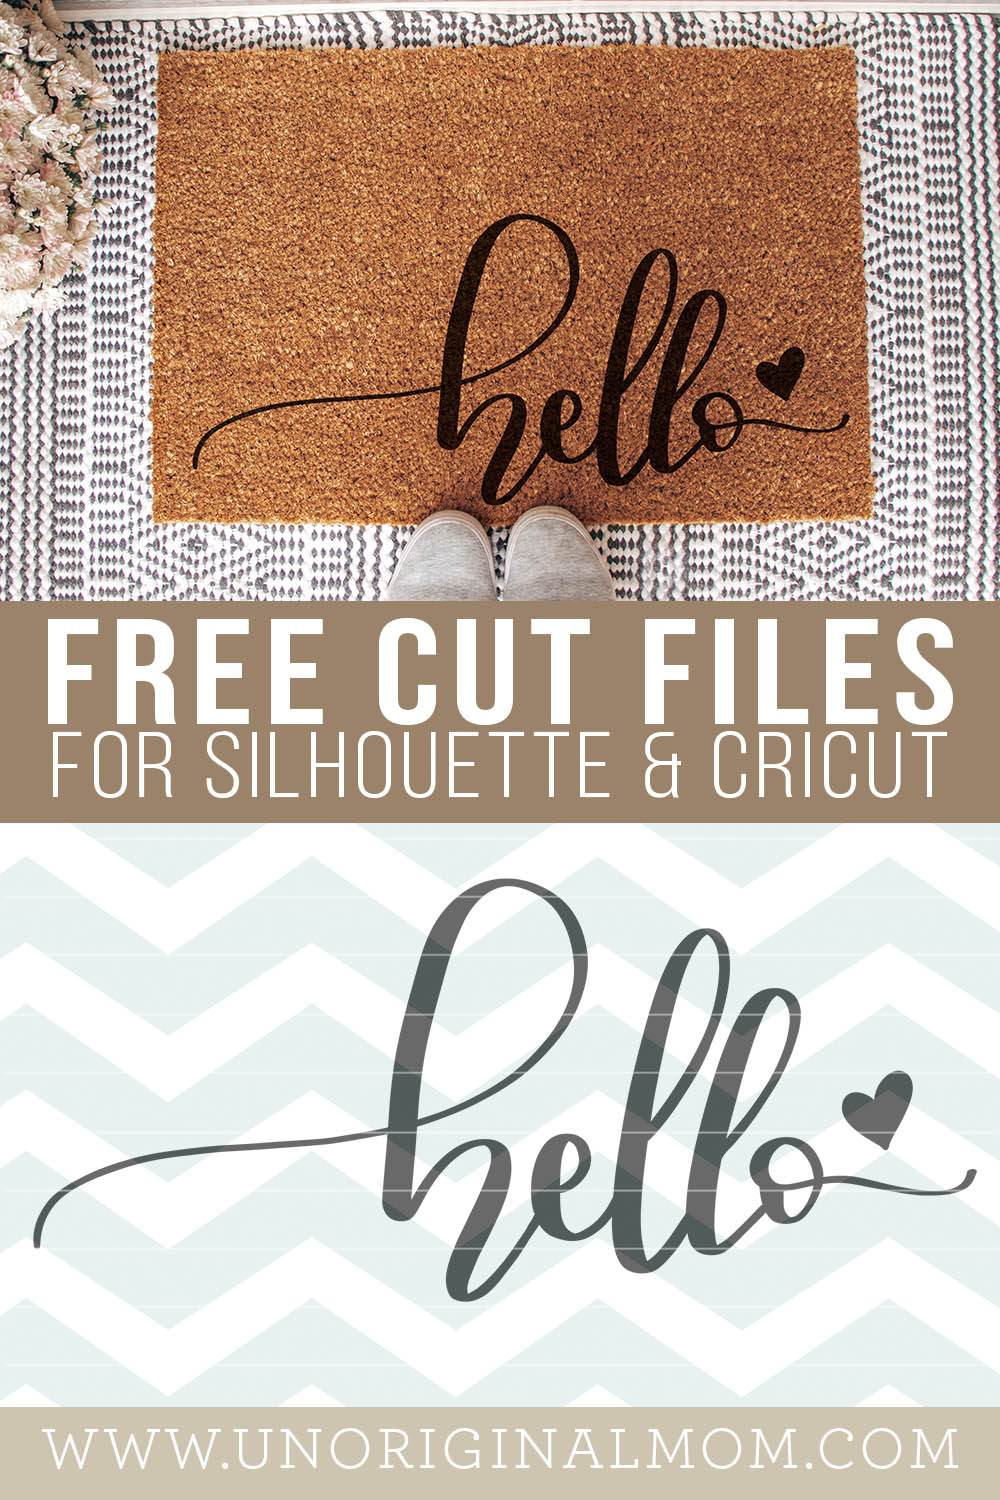 16 Free Welcome Mat SVGs Including Home Sweet Home SVG